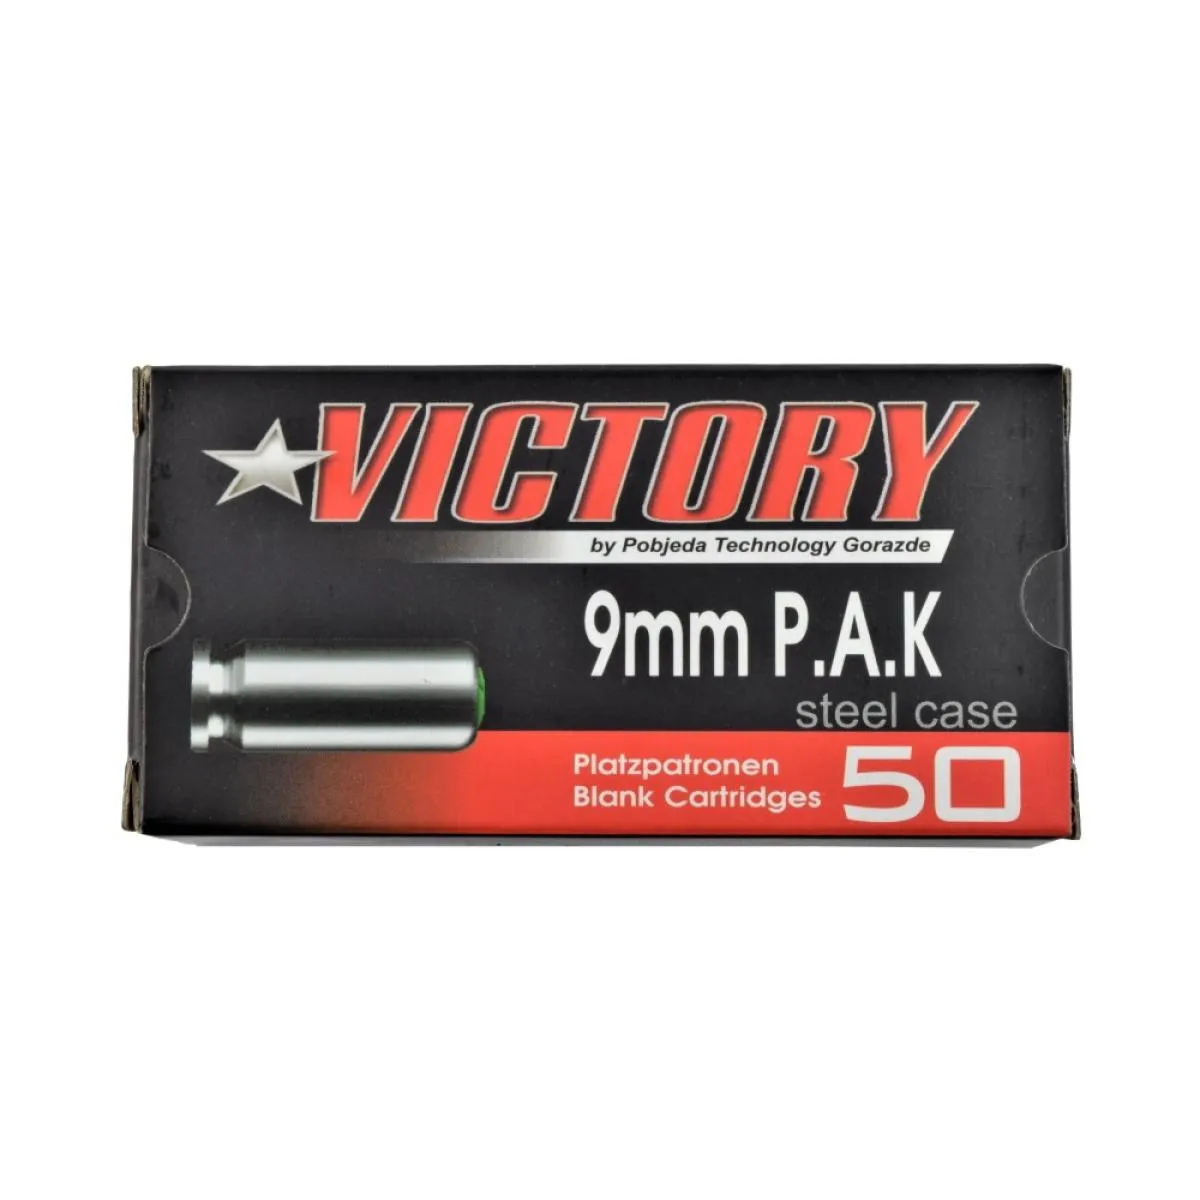 Victory Blank Catridges 9mm P.A.K 50 Pieces